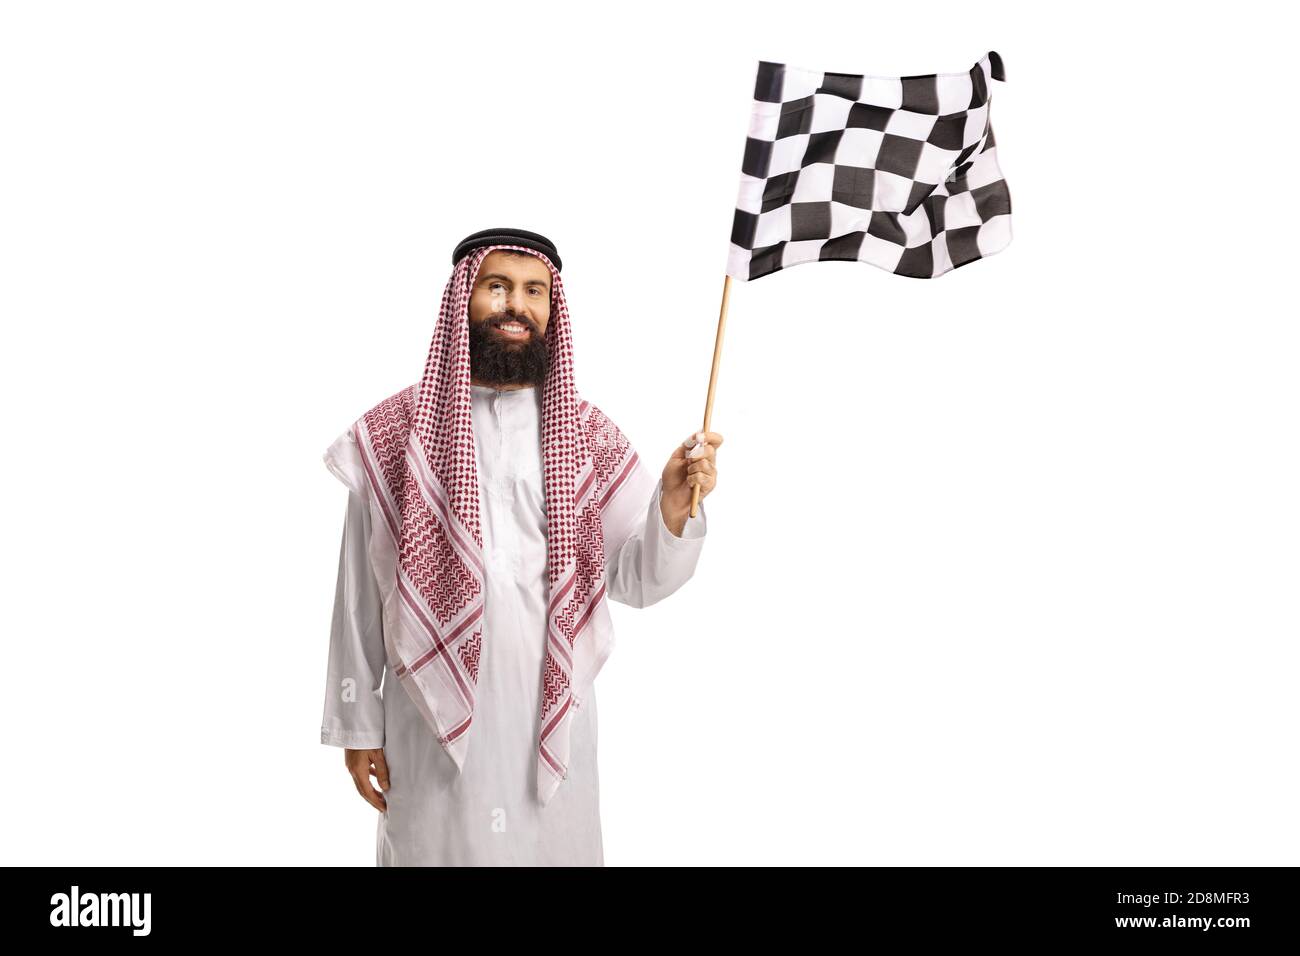 Arab man in a thobe waving a checkered flag isolated on white background Stock Photo